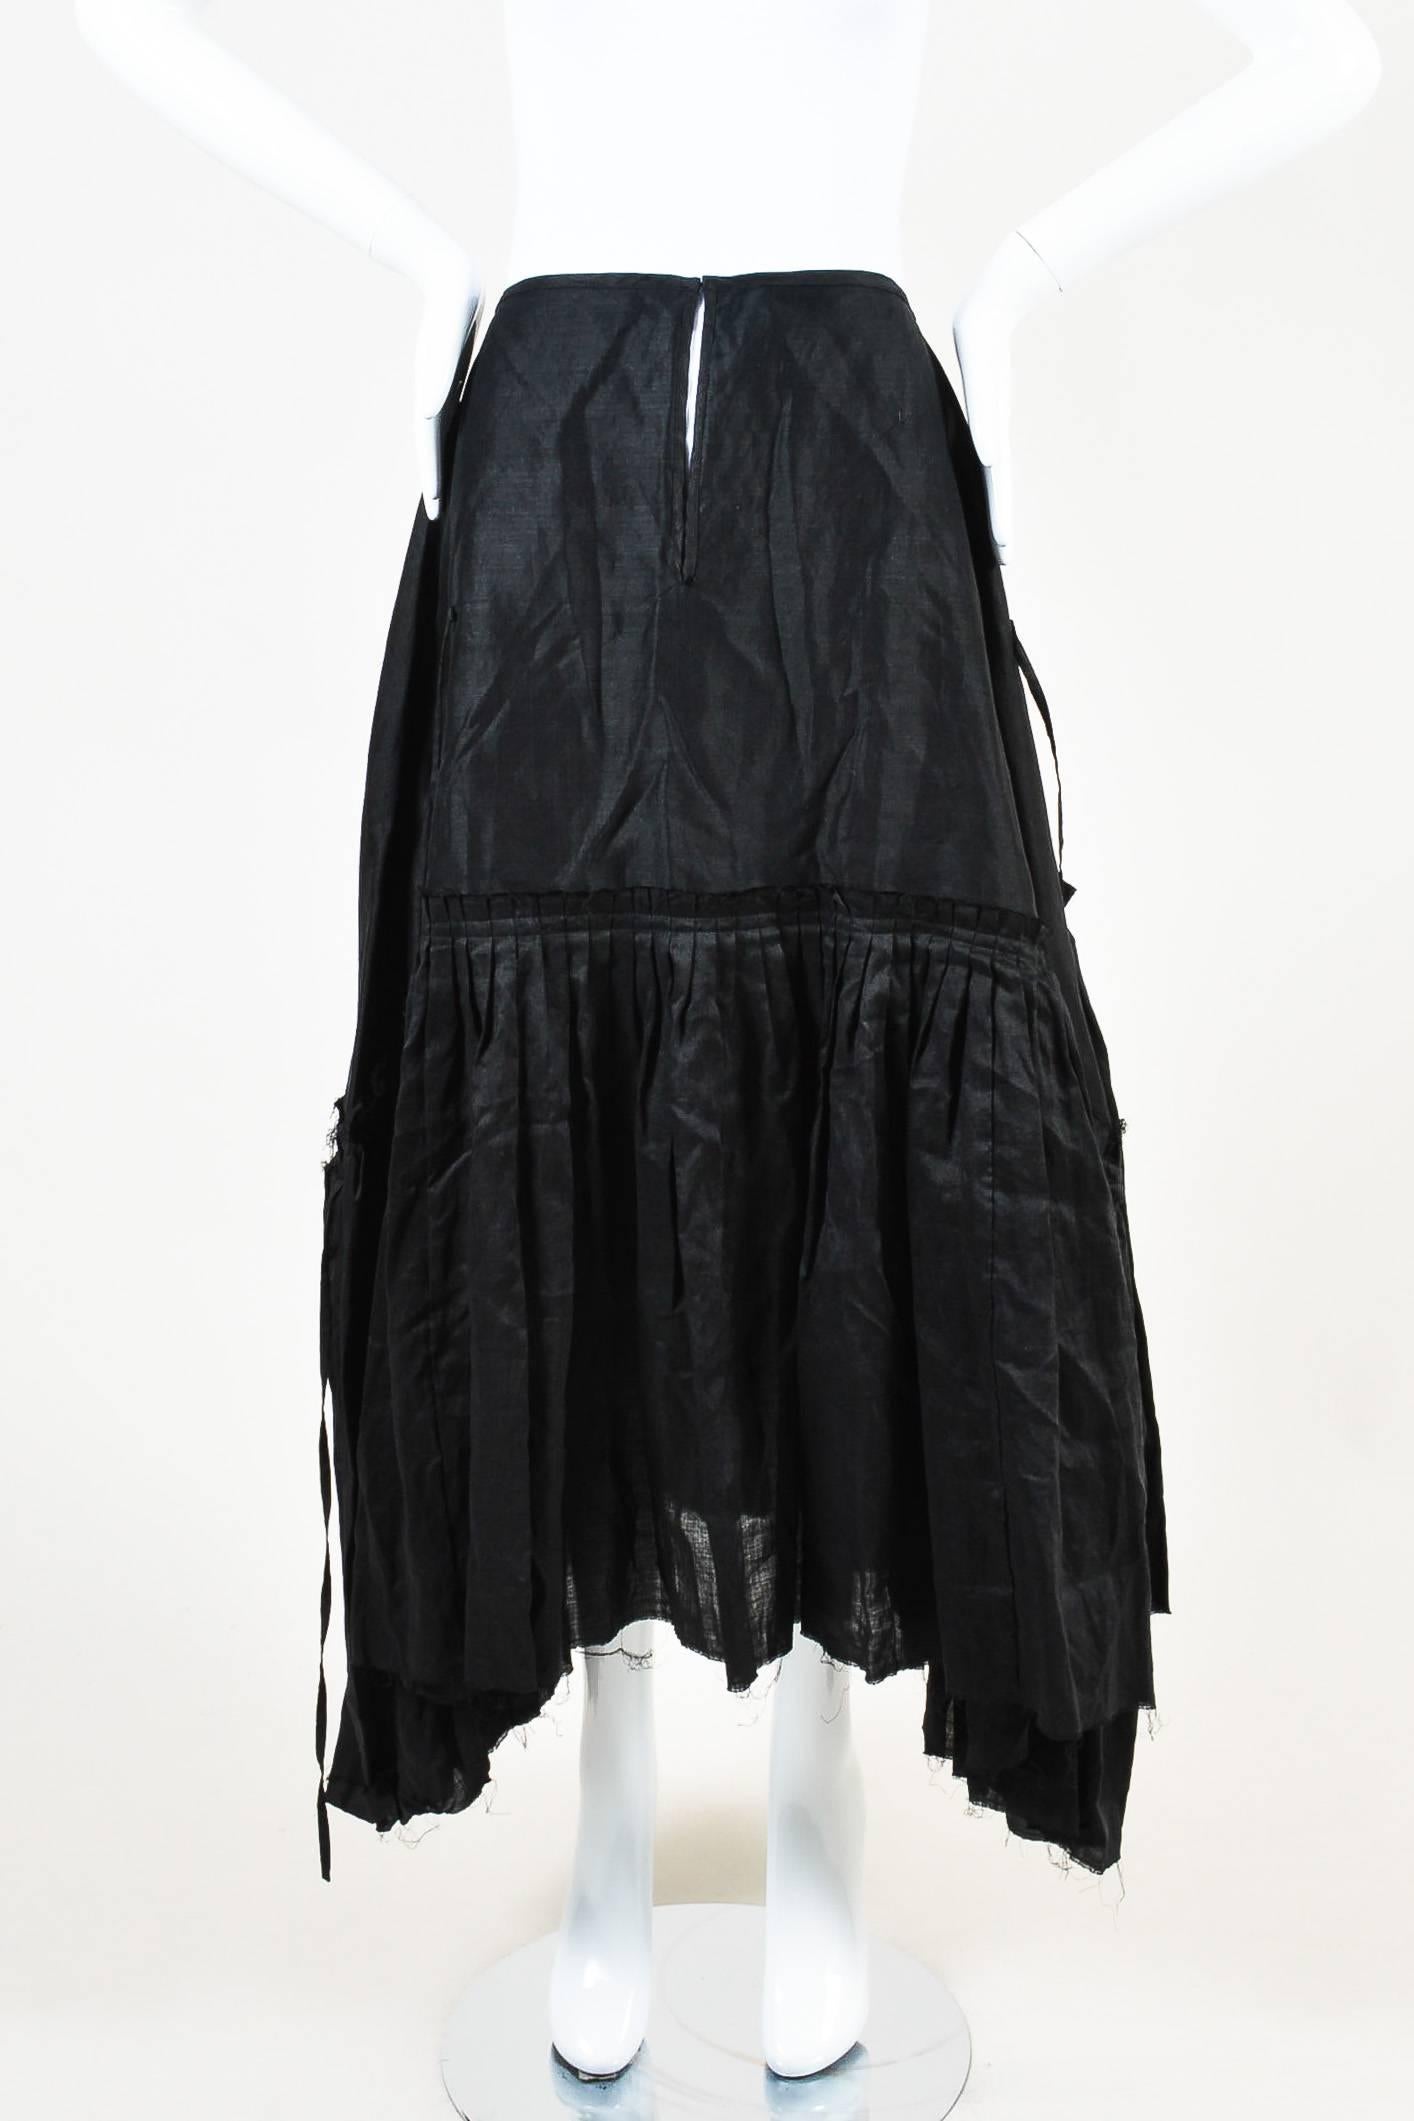 Junya Watanabe Comme des Garcons New w/Tag Black Linen Tiered Pleated Skirt SZ M In New Condition For Sale In Chicago, IL